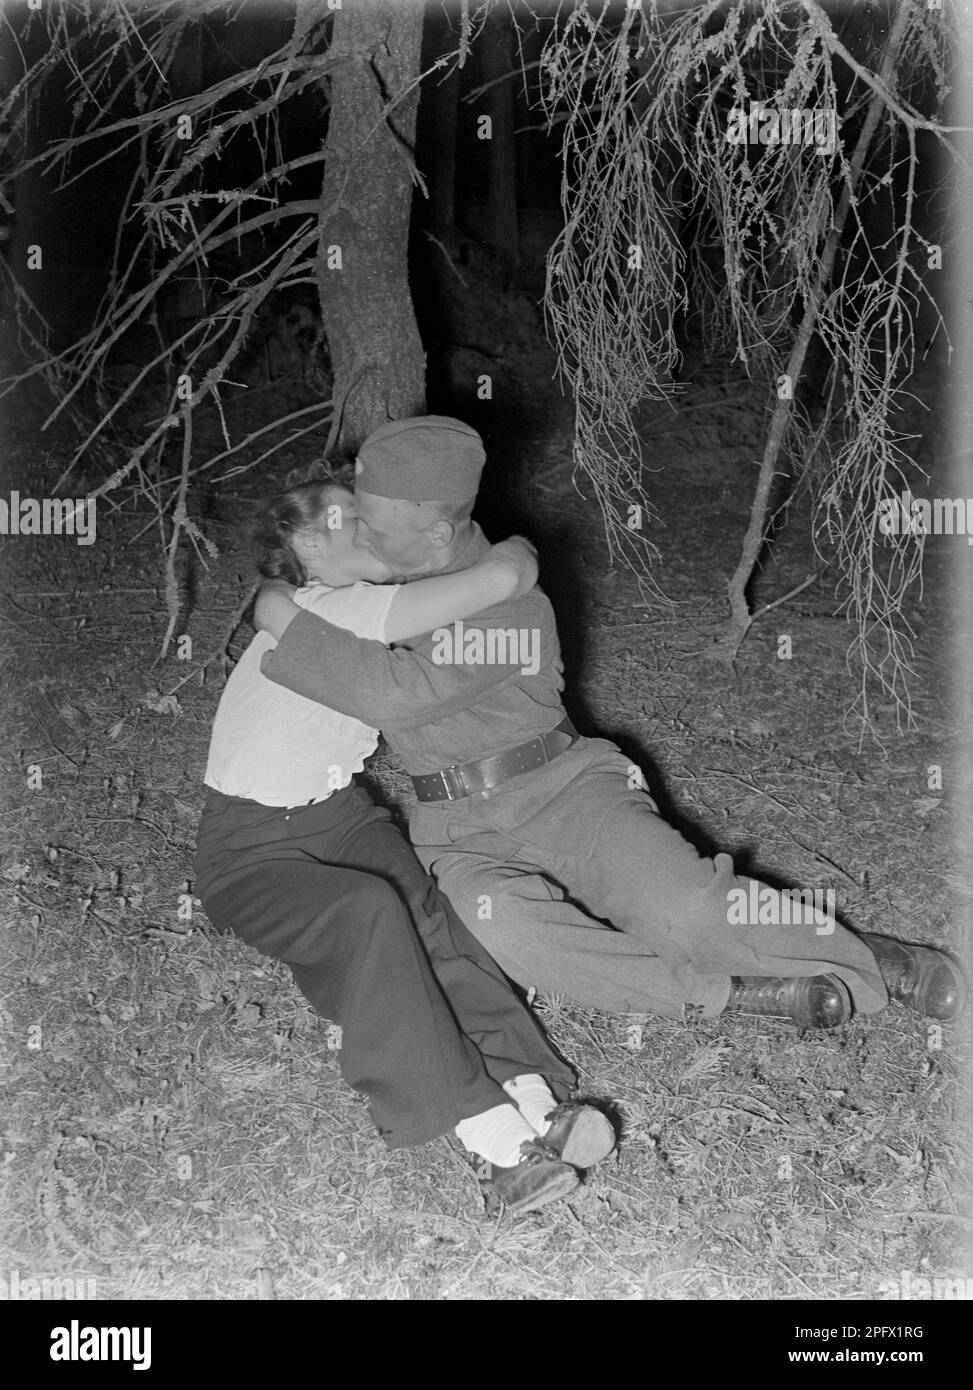 Kissing in the 1940s. A young woman with a soldier in uniform seen kissing and hugging.     Sweden 1941 Kristoffersson Ref 188-2 Stock Photo